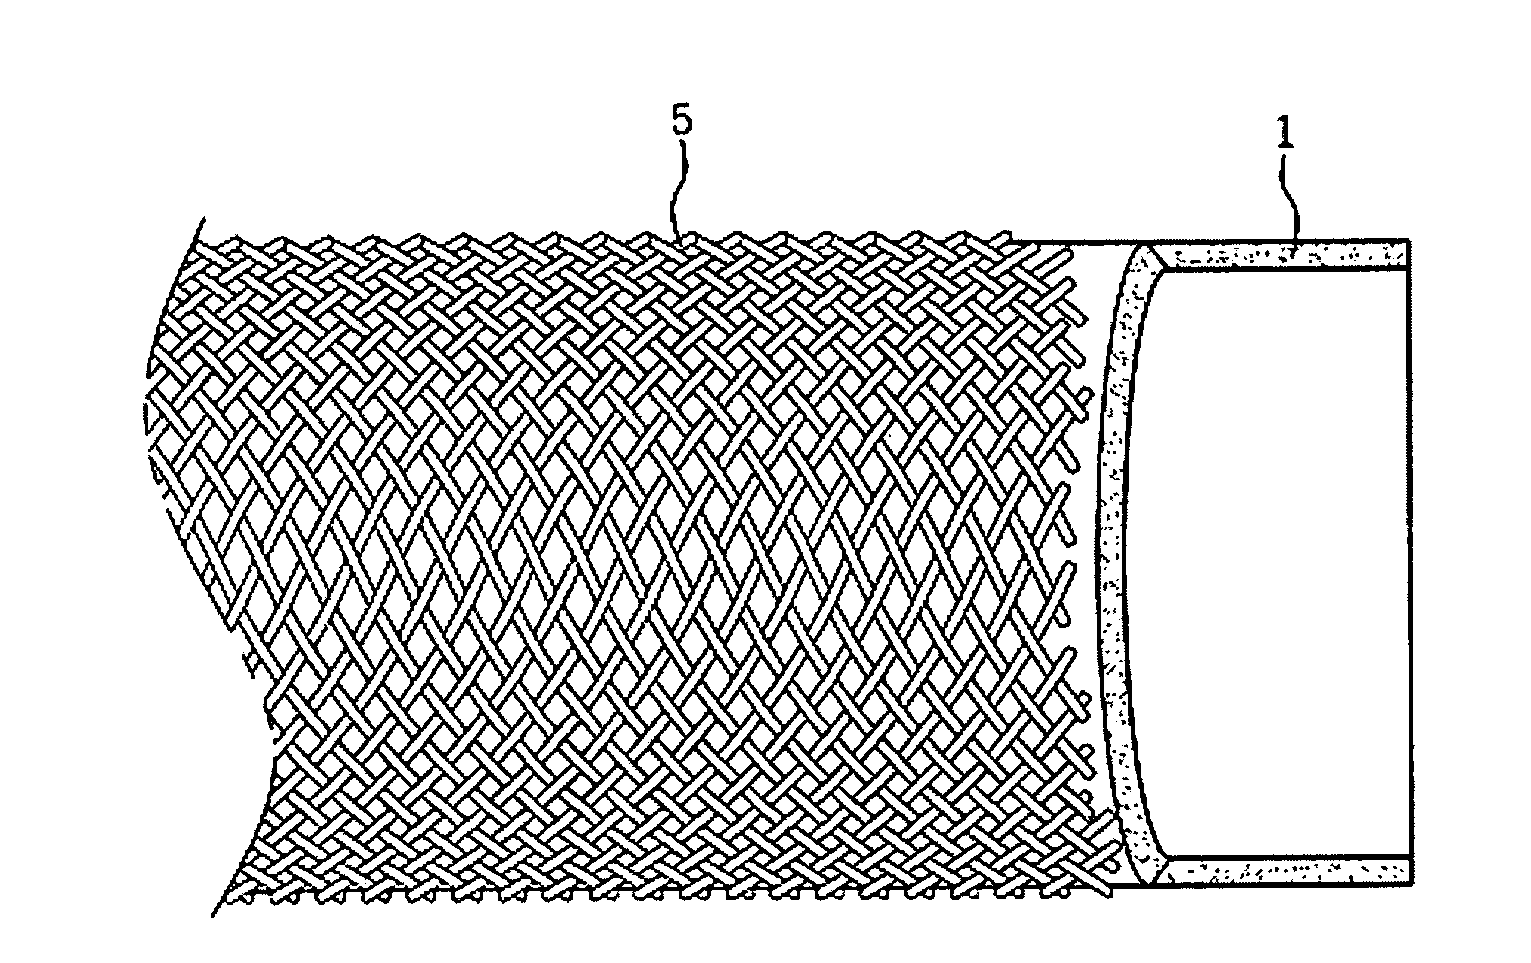 Hollow fiber membrane for feeding mixture into hollow space thereof